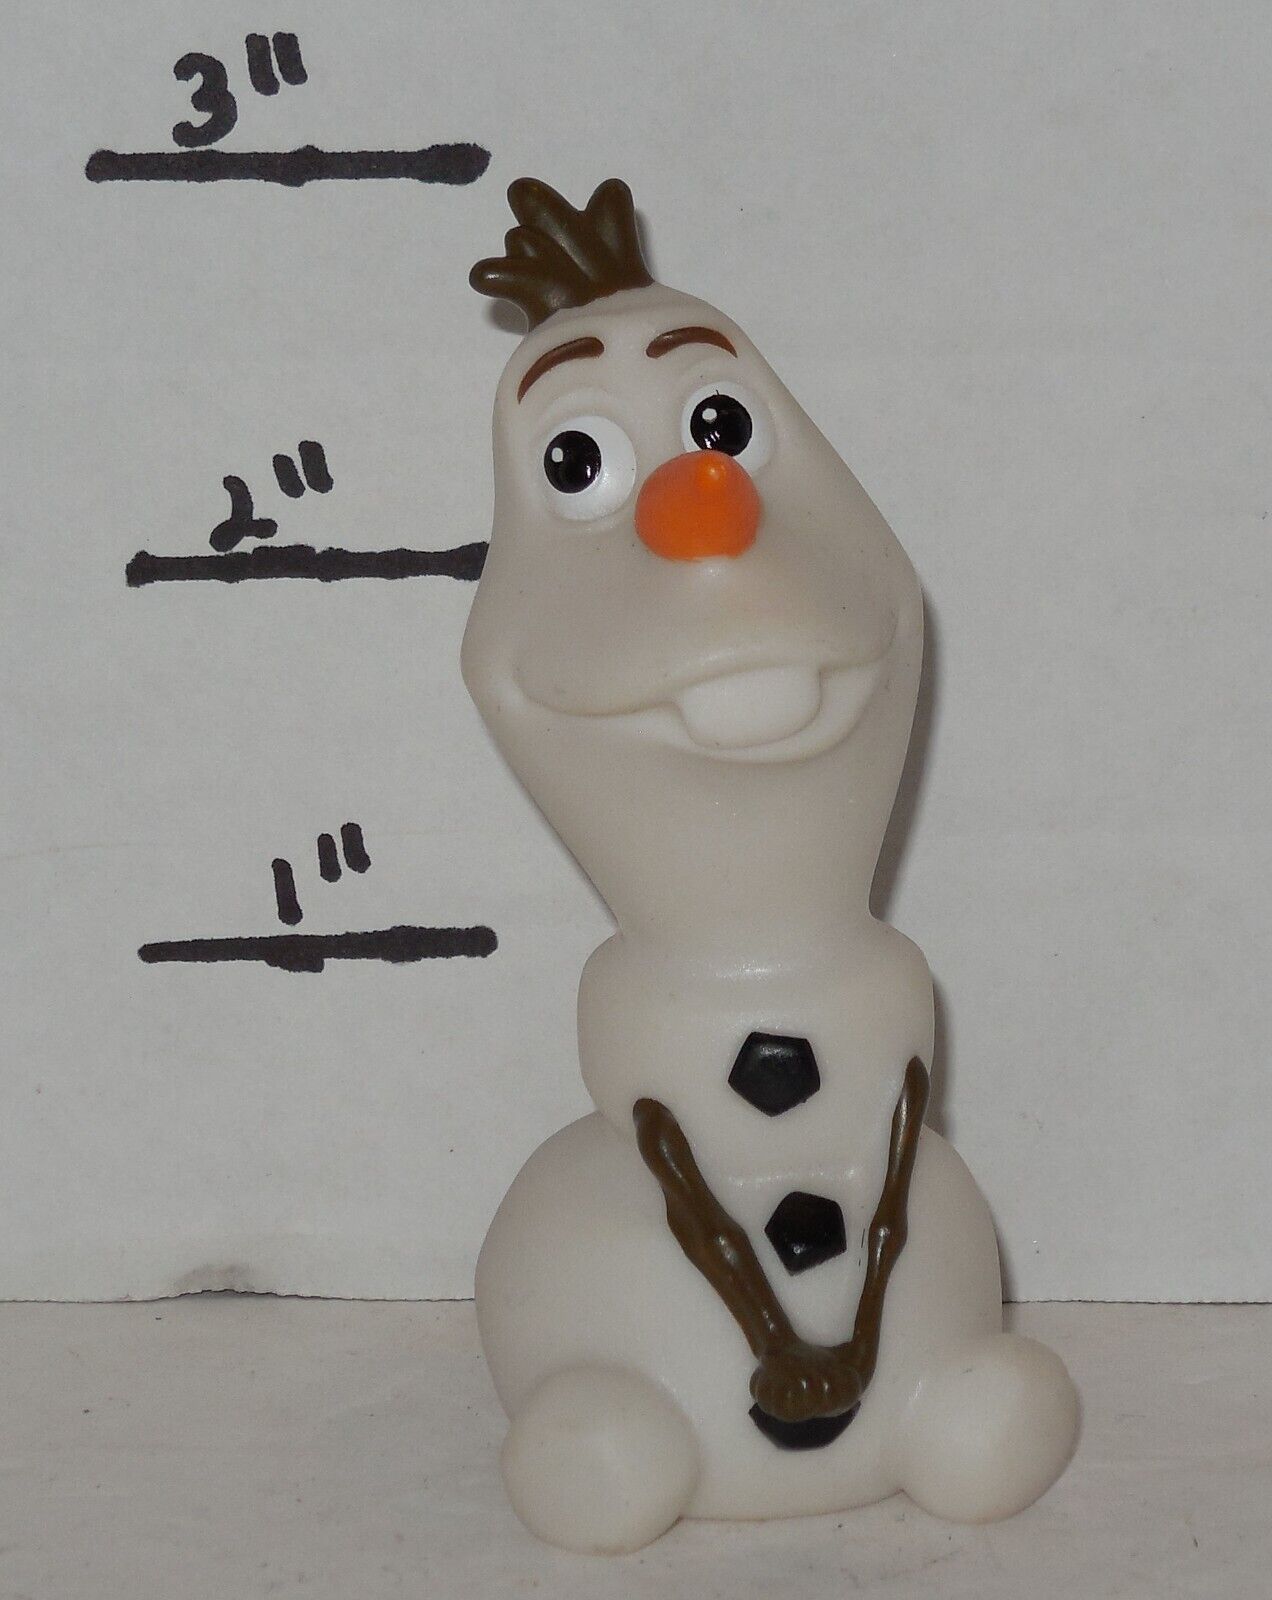 Primary image for Disney Frozen Olaf 3" PVC Figure Cake Topper